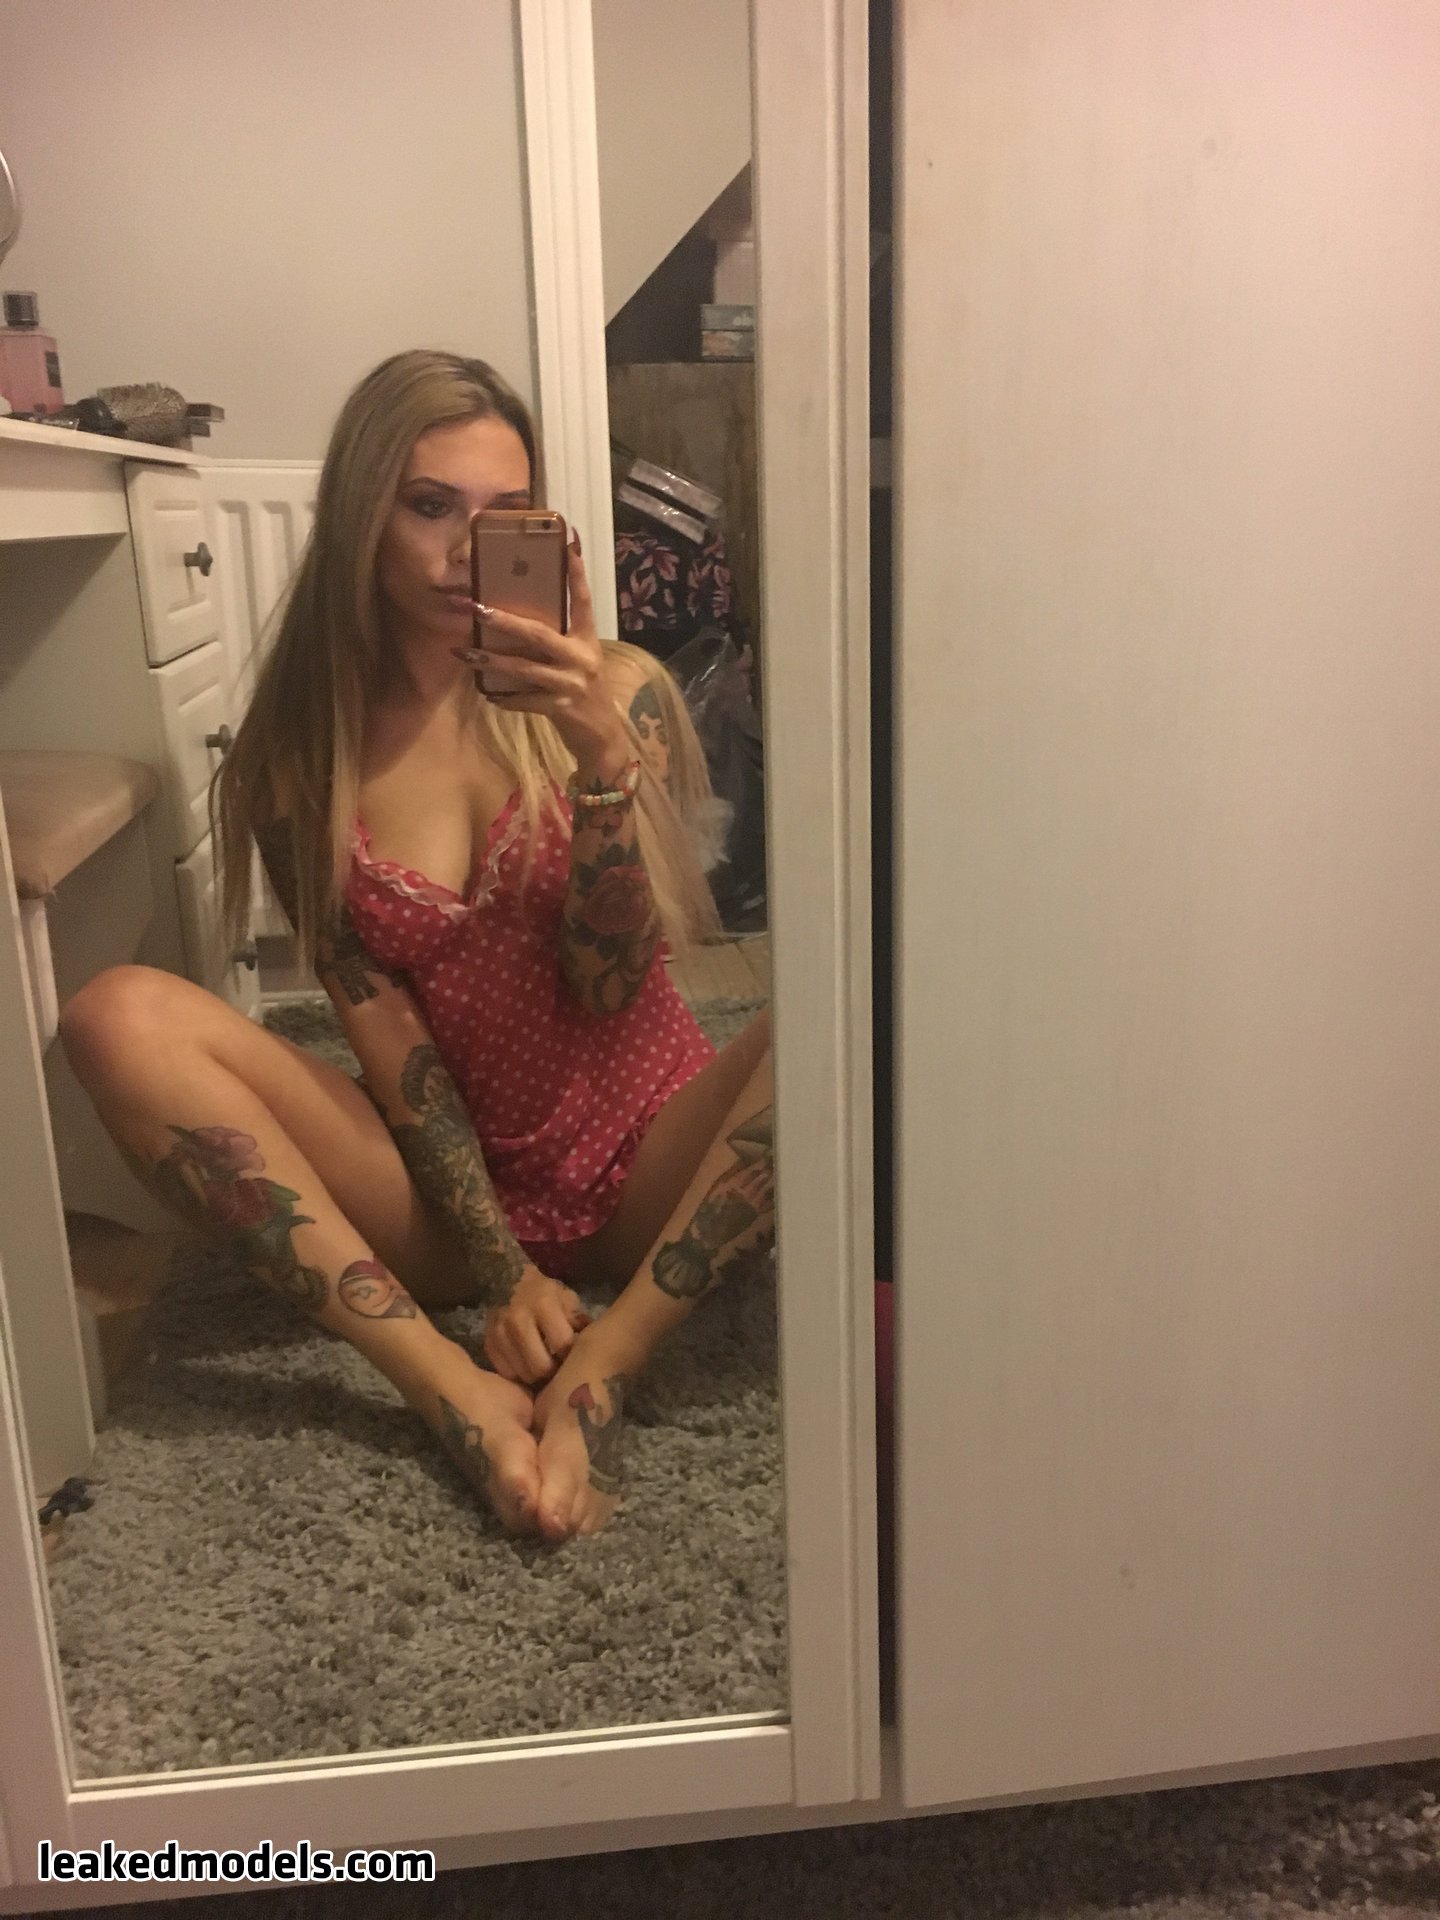 Hope brookes OnlyFans Nude Leaks (30 Photos)